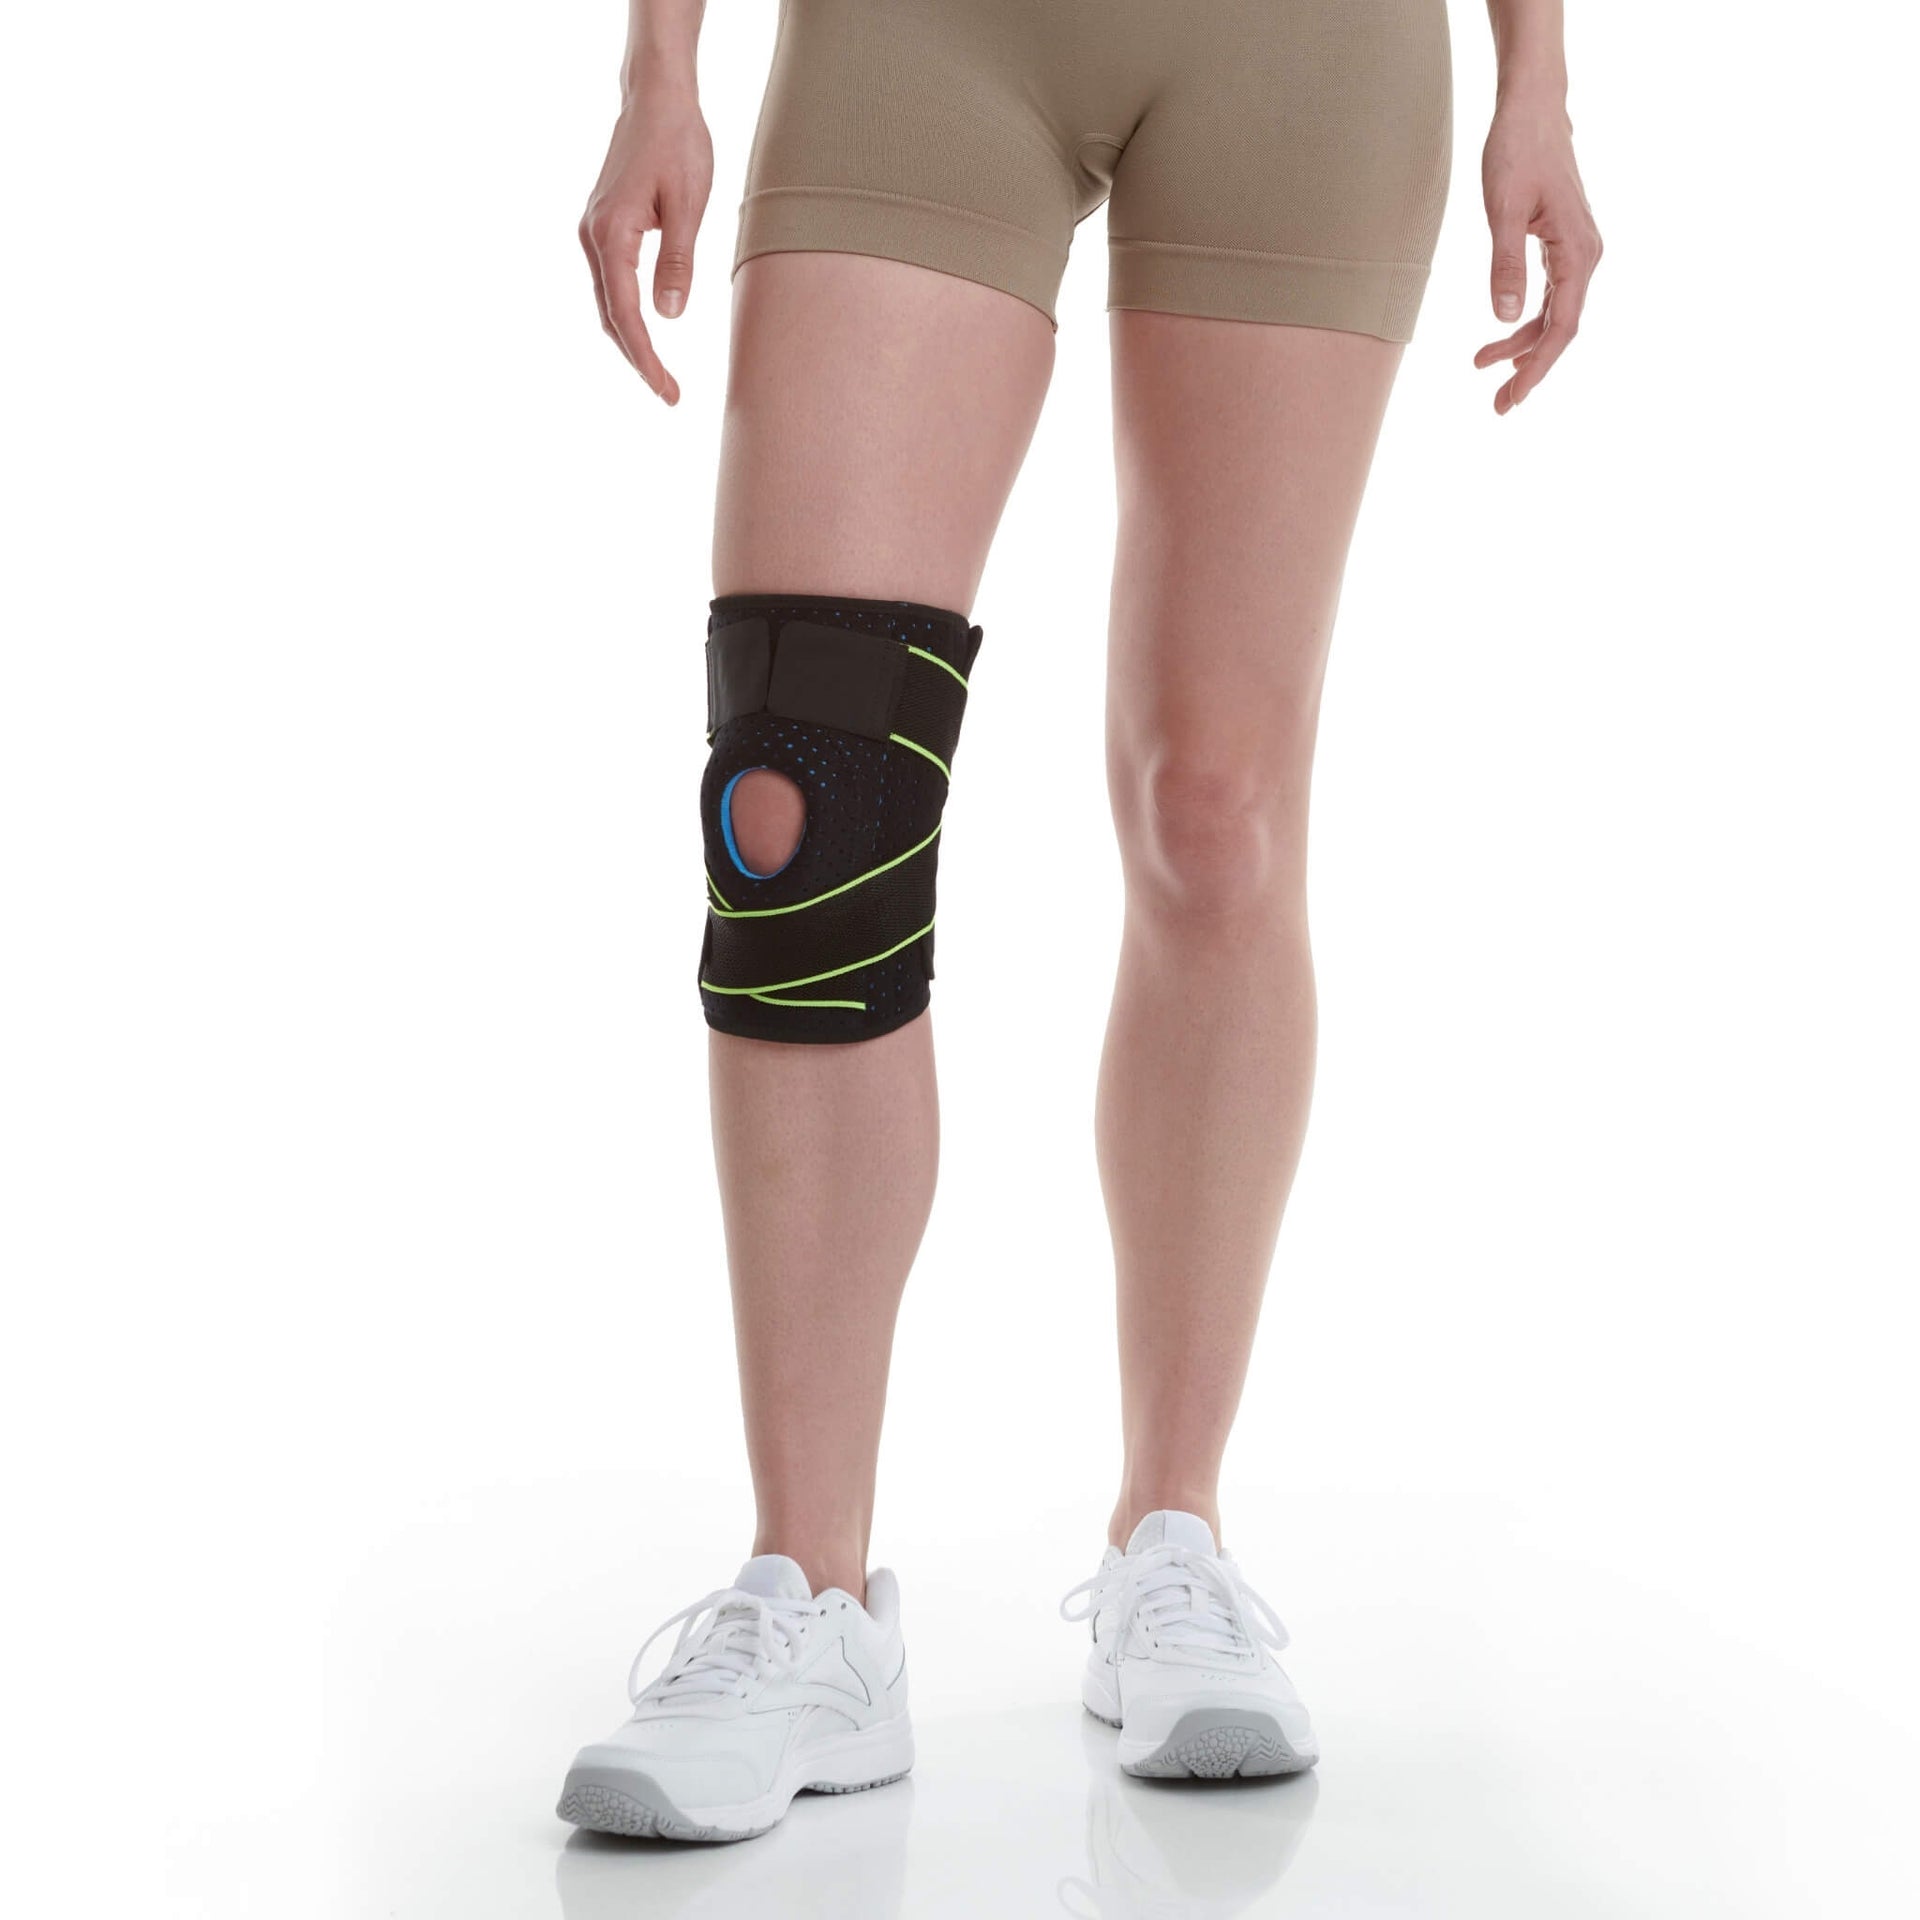 Knee Brace With Patella Gel and Stays Support for Inflammation, Swelling &  Kneecap Pain